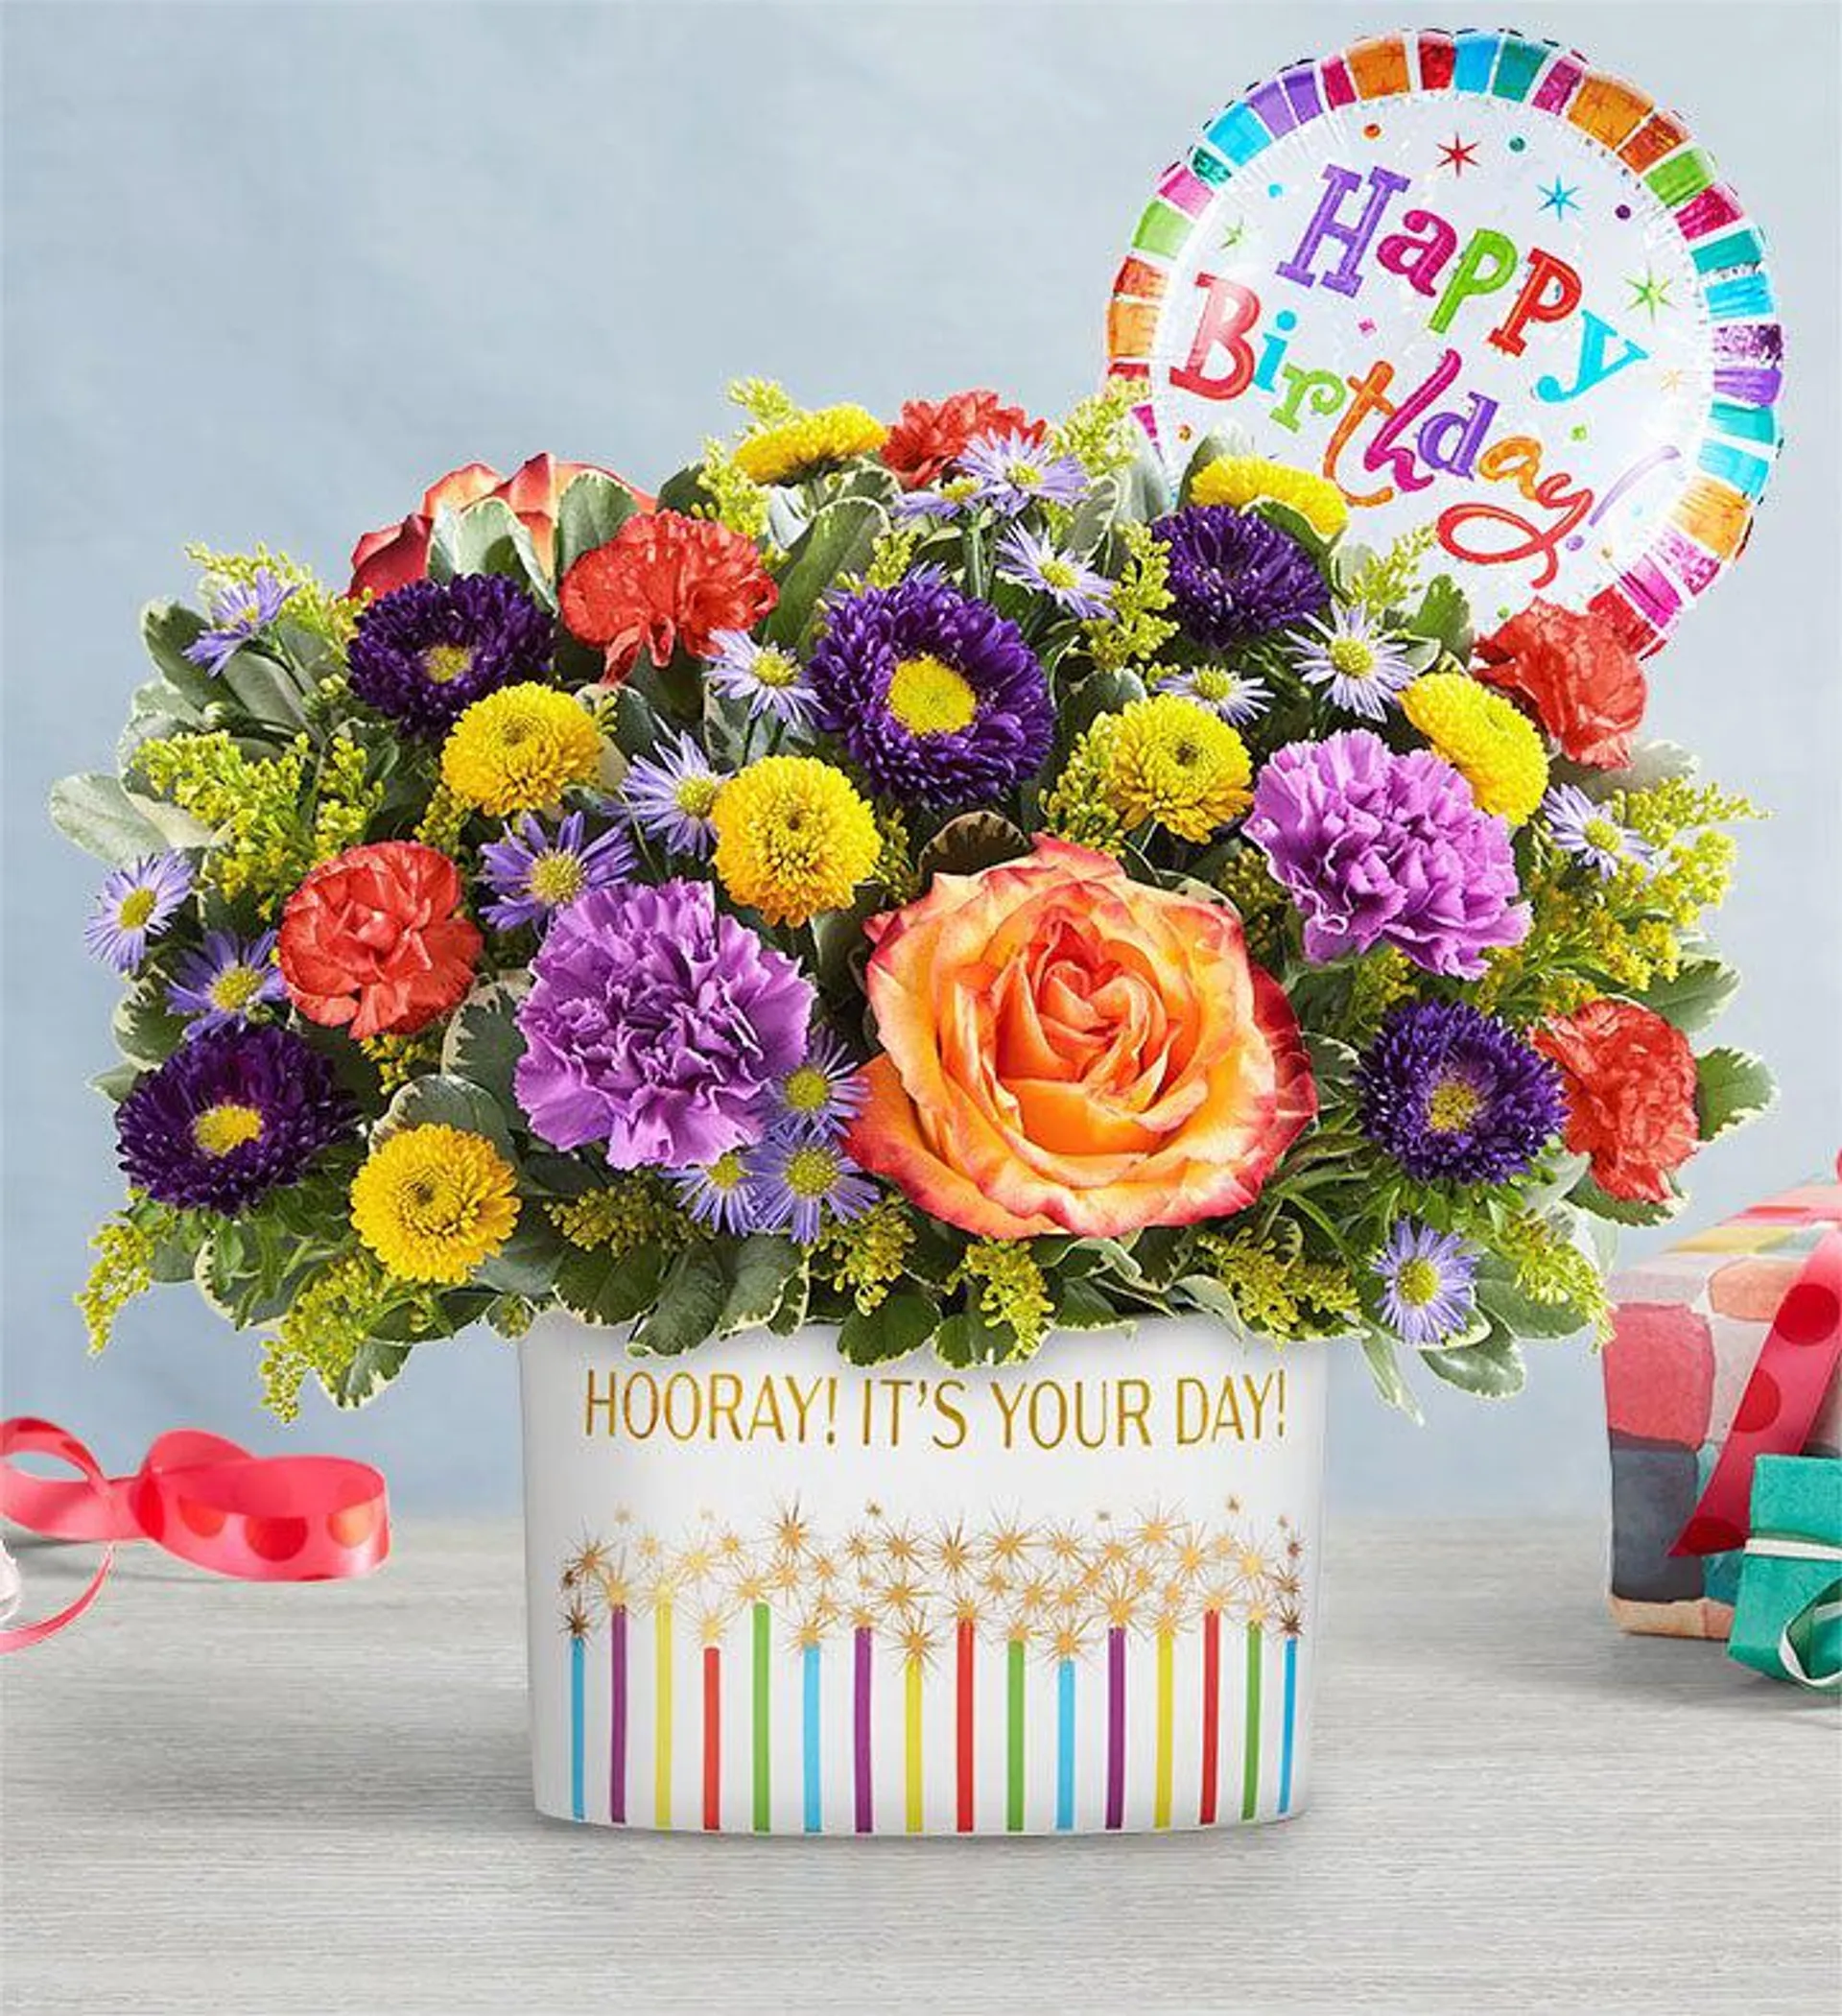 Hooray! It’s Your Day! ™ Bouquet